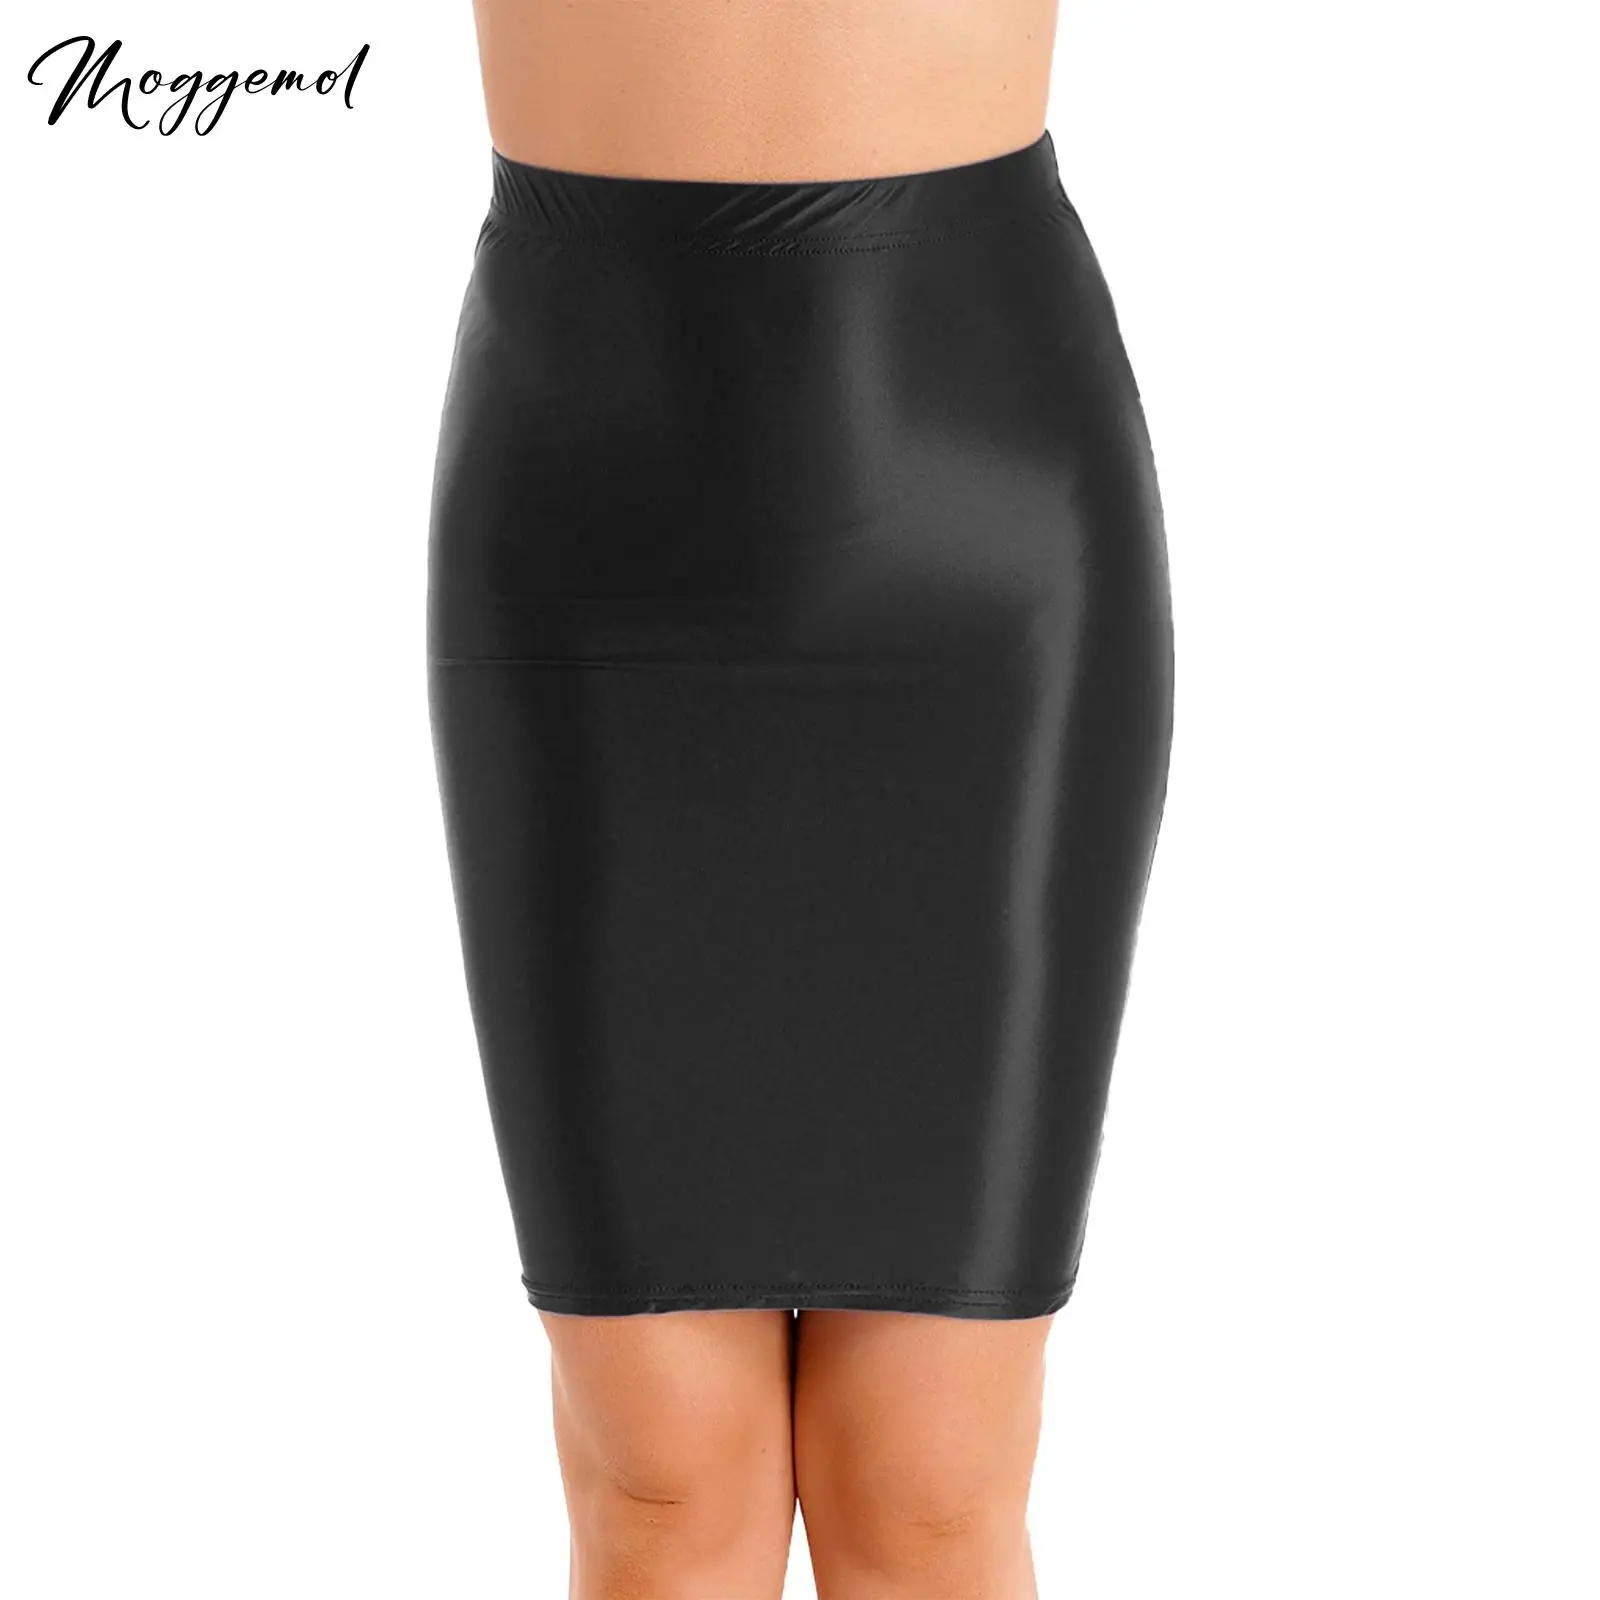 

Womens Glossy Rave Party Nightclub Stretchy Casual Solid Color Bodycon Shiny Slim Mini Skirt Female High Waist Pencil Skirt